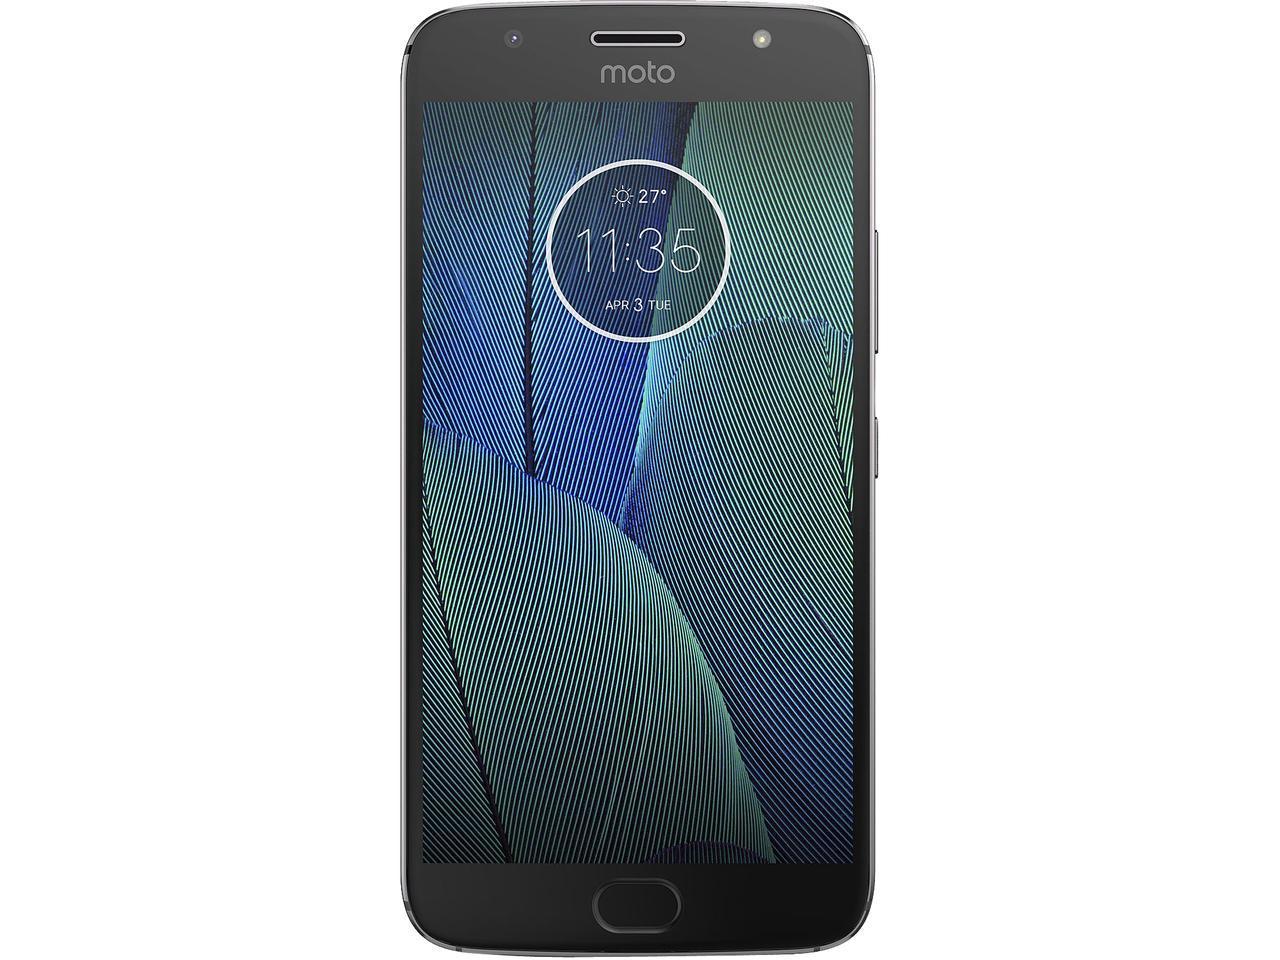 Today only: Moto G5S Plus 64GB smartphone + Bluetooth headphones for $250